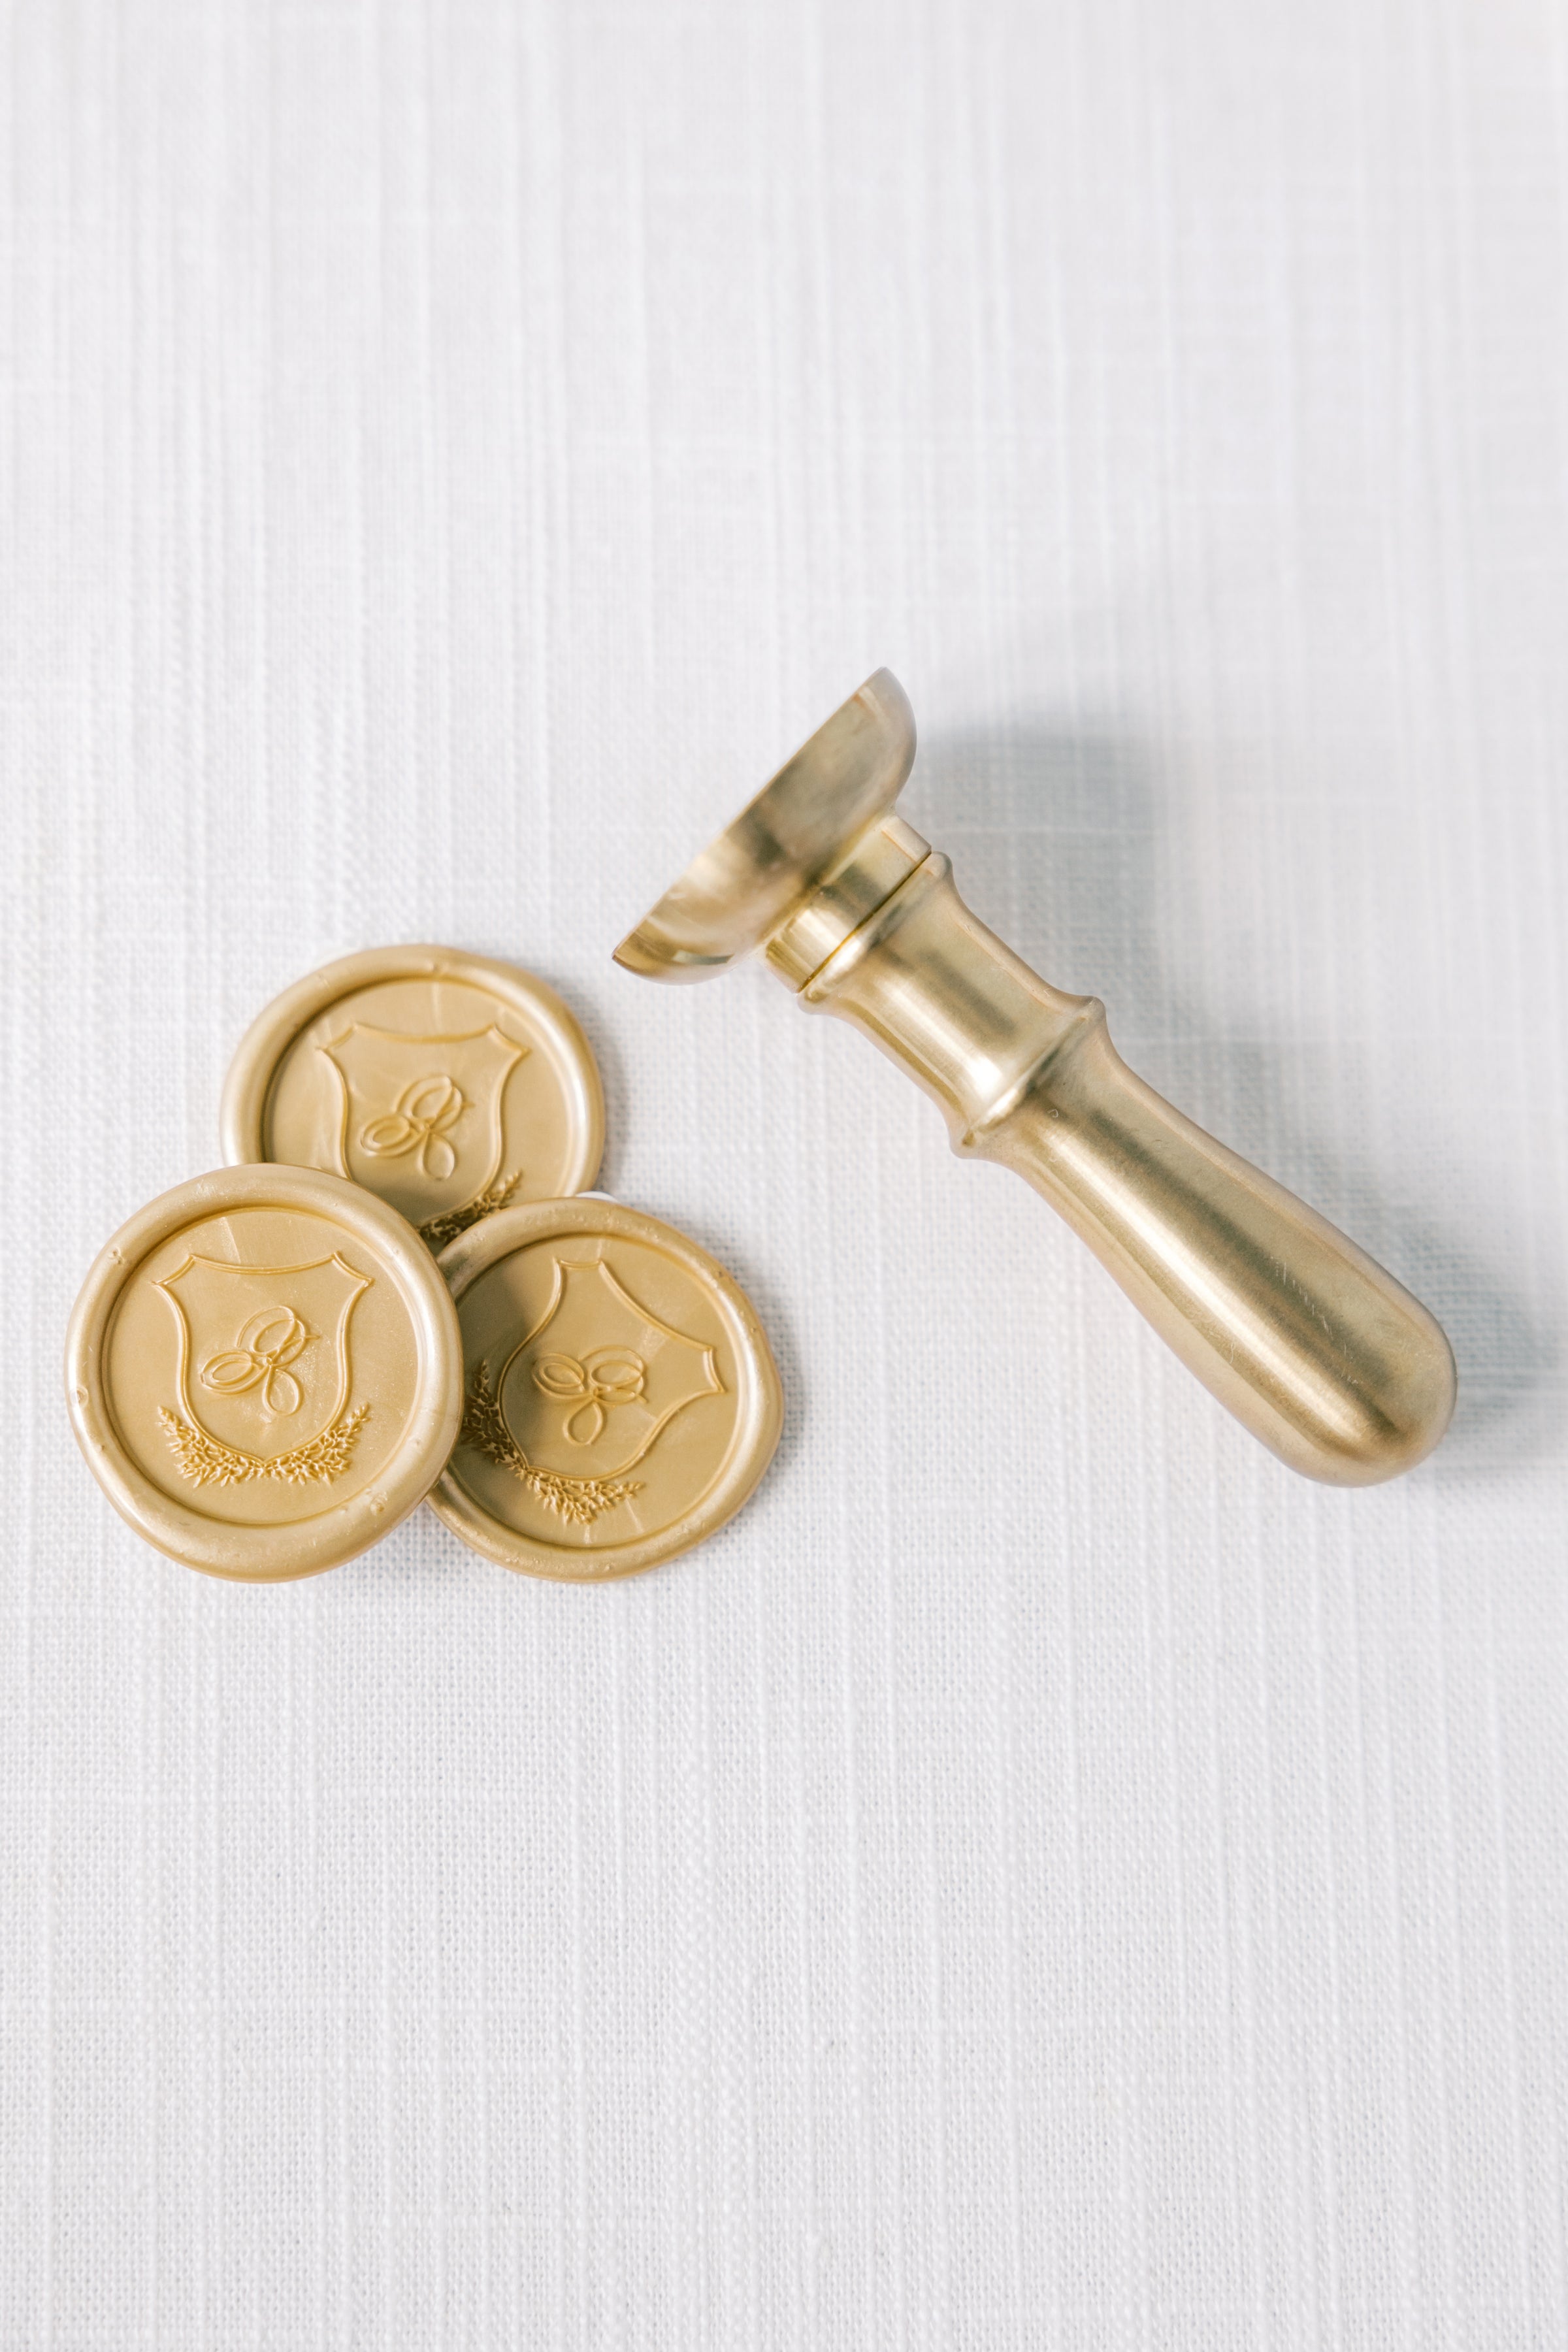 WAX-SEAL-STAMP